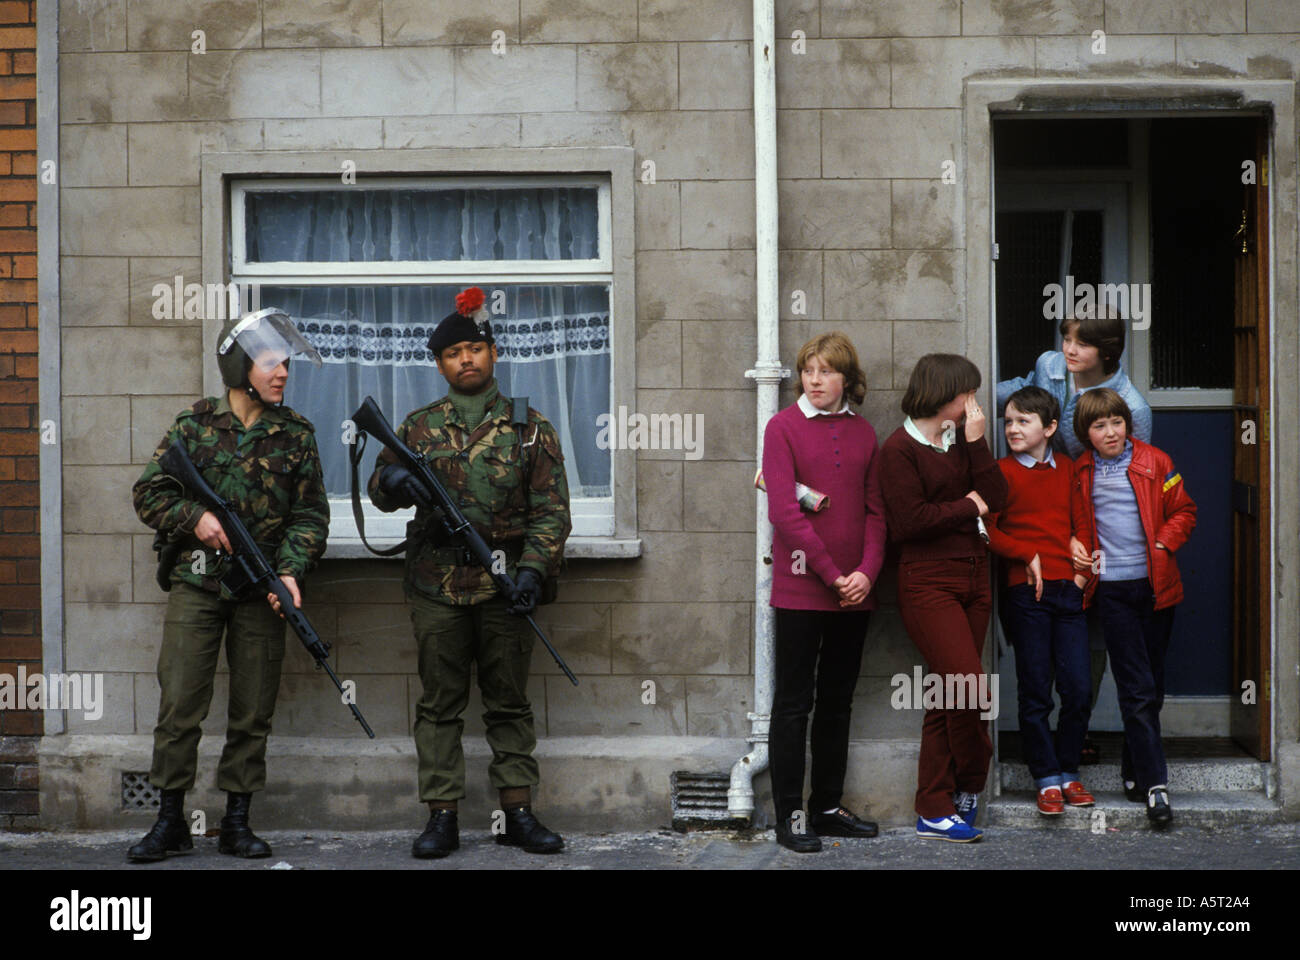 The Troubles 1980s British troops black British army soldier on foot patrol in Belfast. Multi ethnic and armed, family mother children daily life 1981 Stock Photo